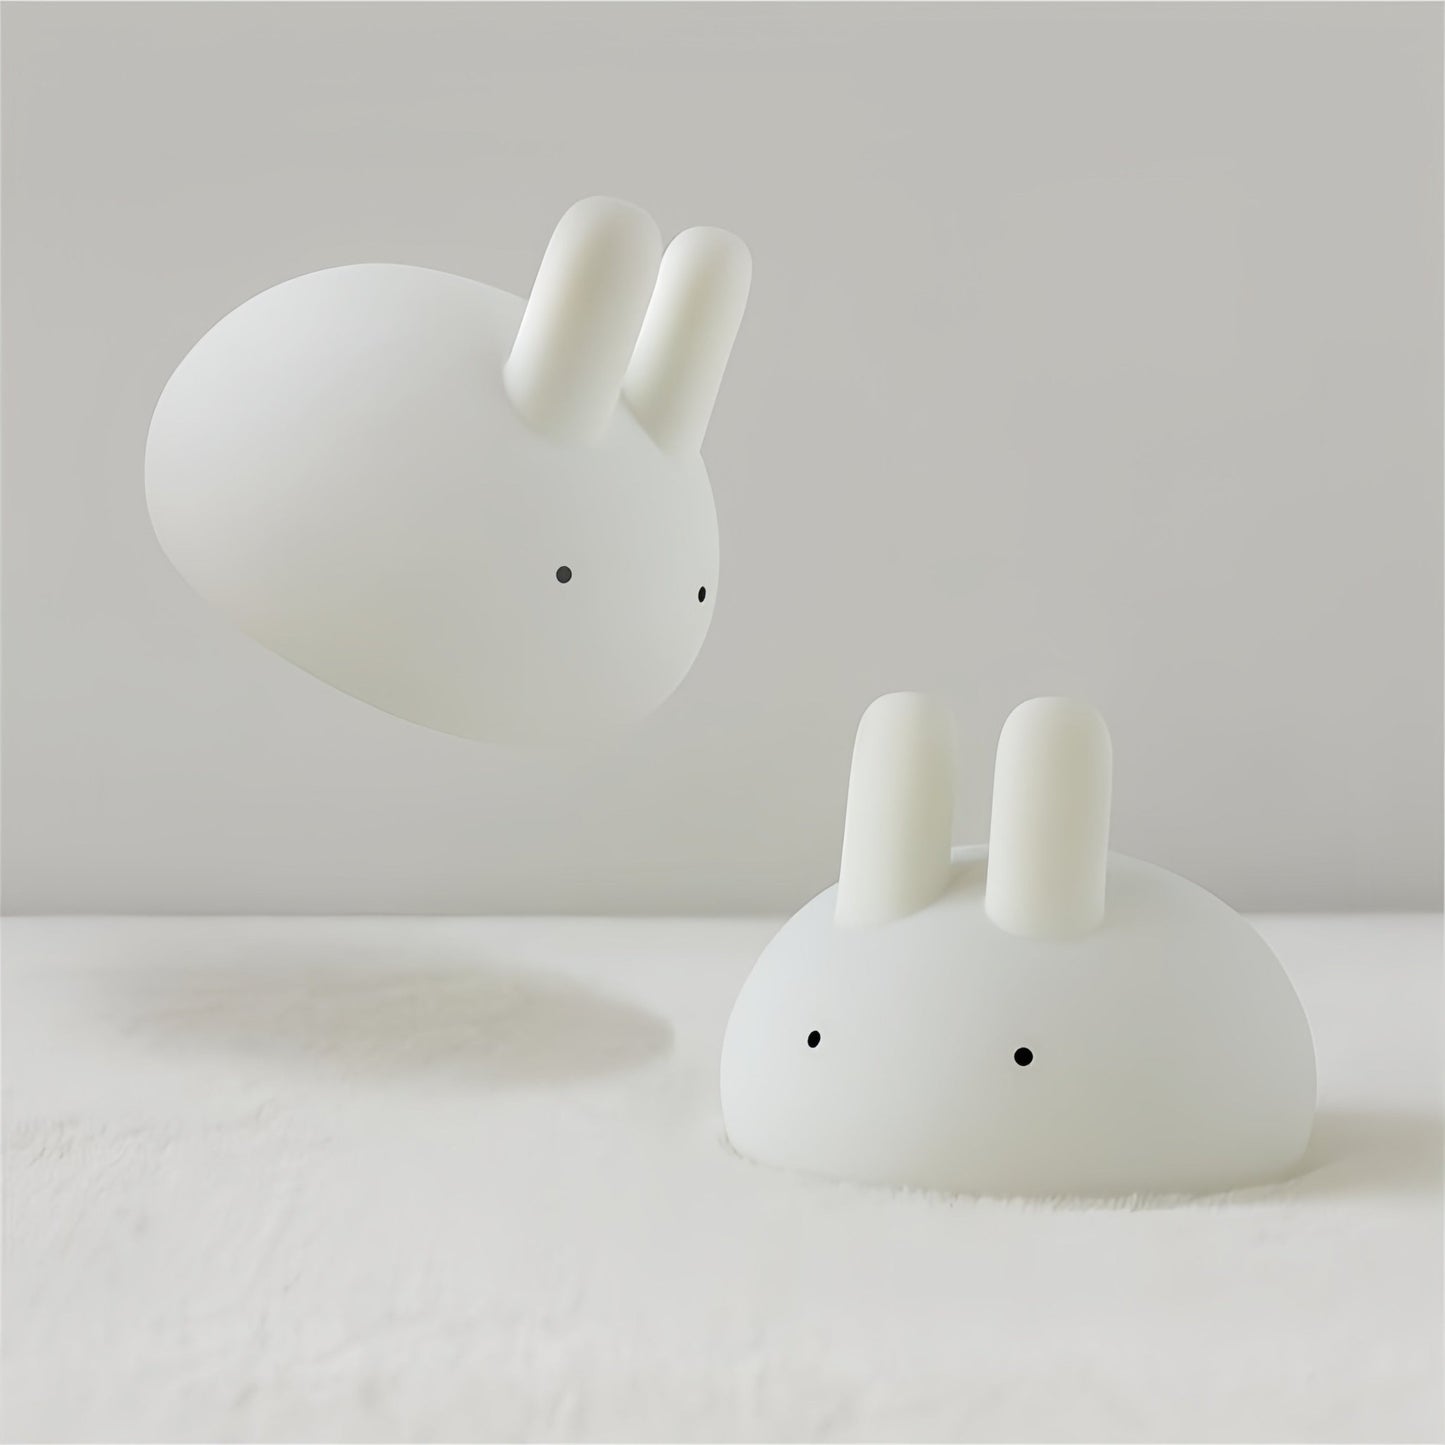 Bunny Silicone Night Lamp with LED Lights - Adorable and Soothing Illumination